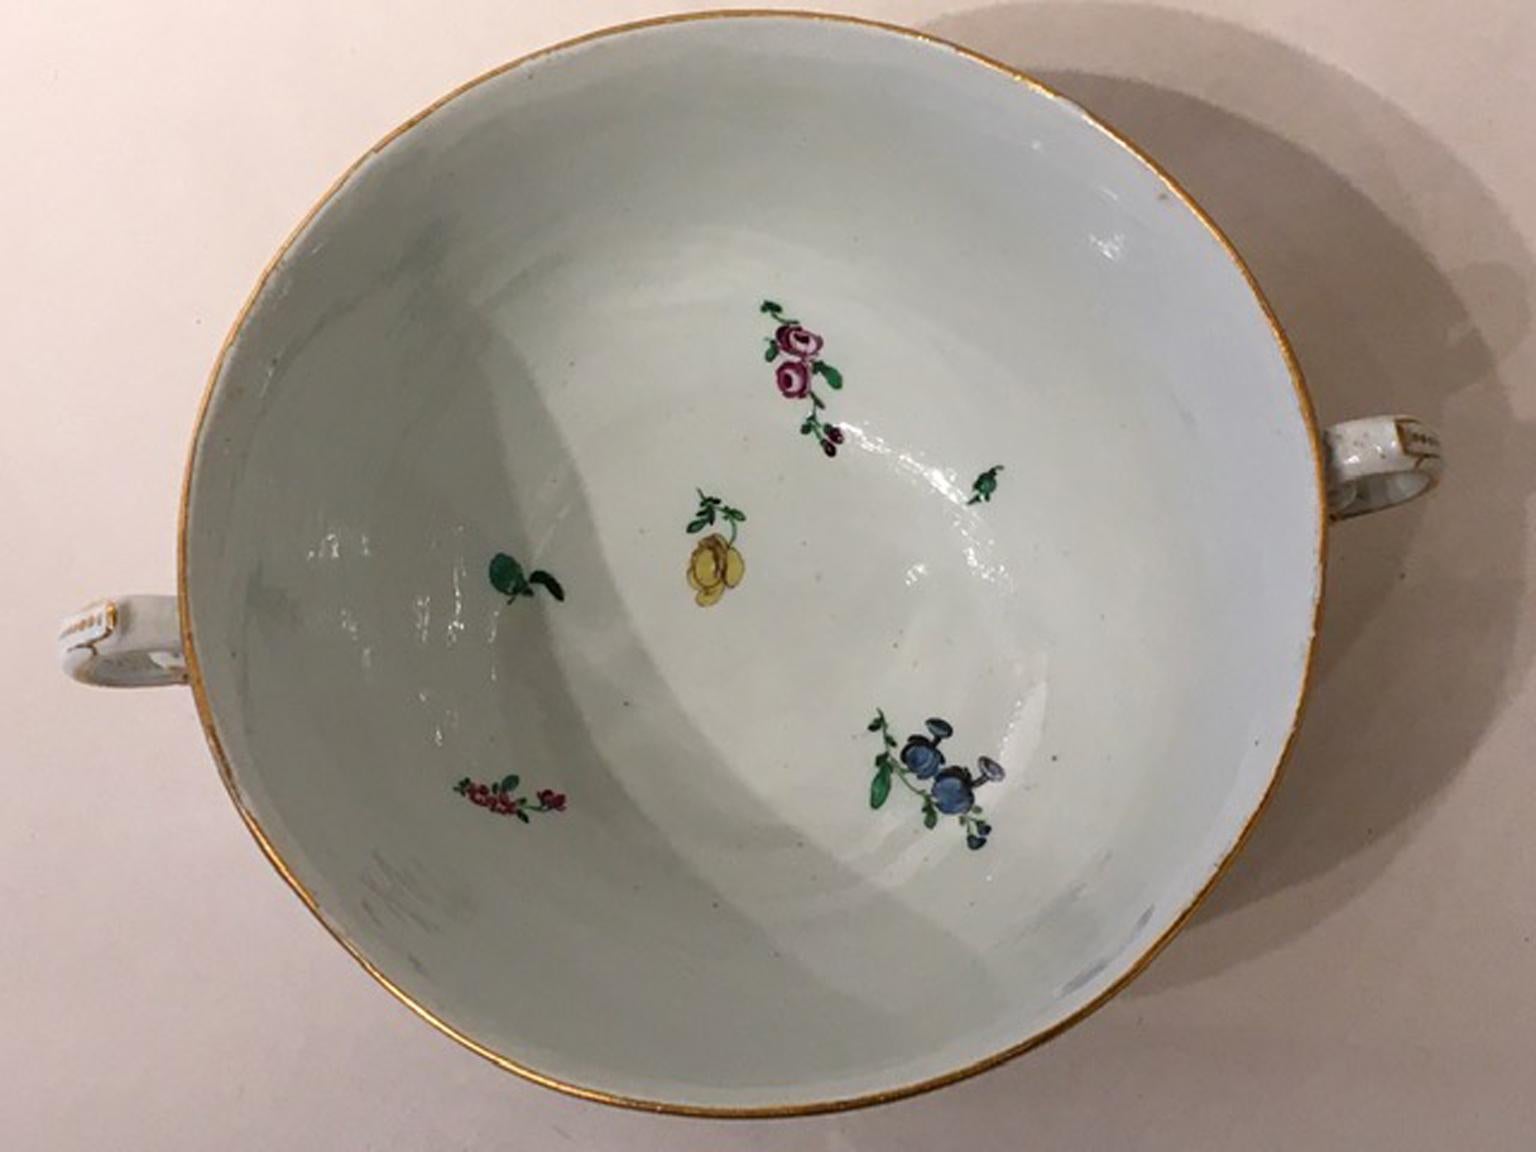 Italy Richard Ginori Mid-19th Century Porcelain Covered For Sale 6